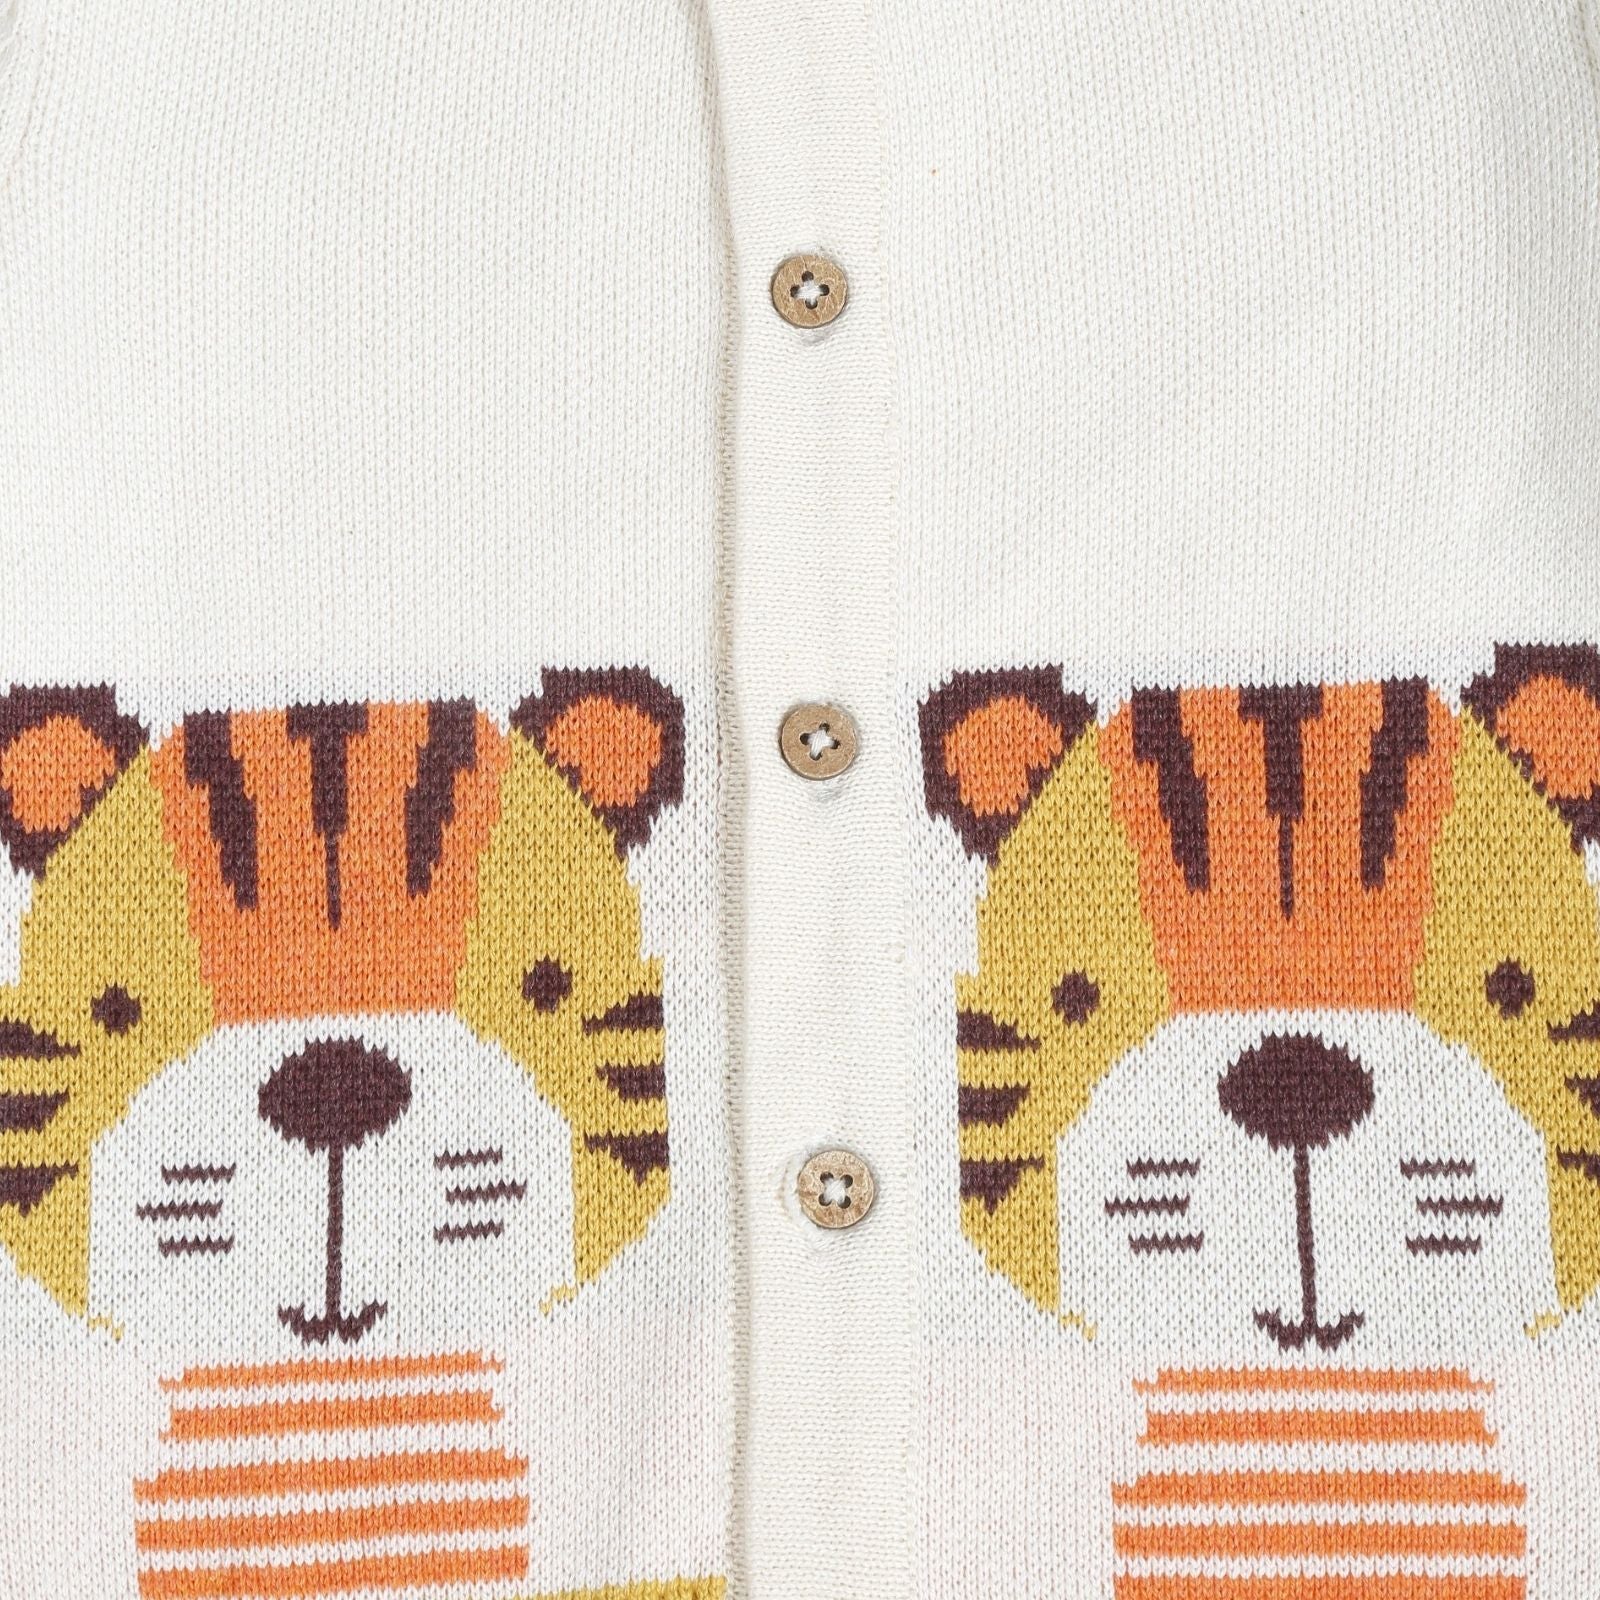 Greendeer Delighted Lion,  Sunny Fox & Adorable Tiger 100% Cotton Sweater Set of 3